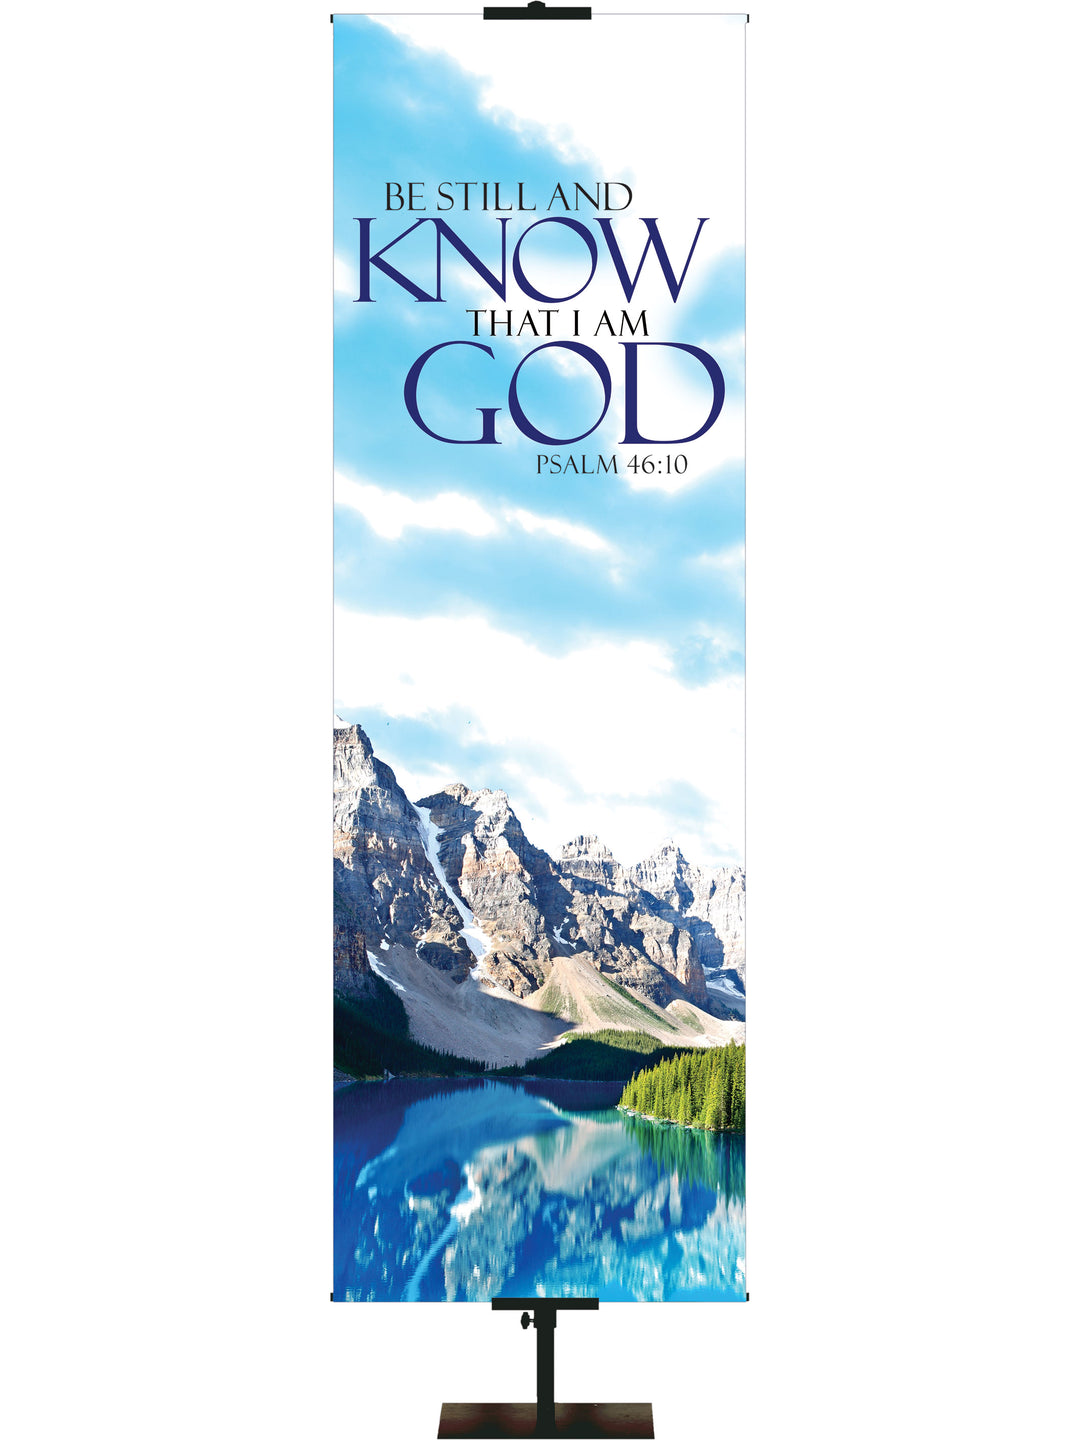 Words of Hope Be Still and Know - Year Round Banners - PraiseBanners